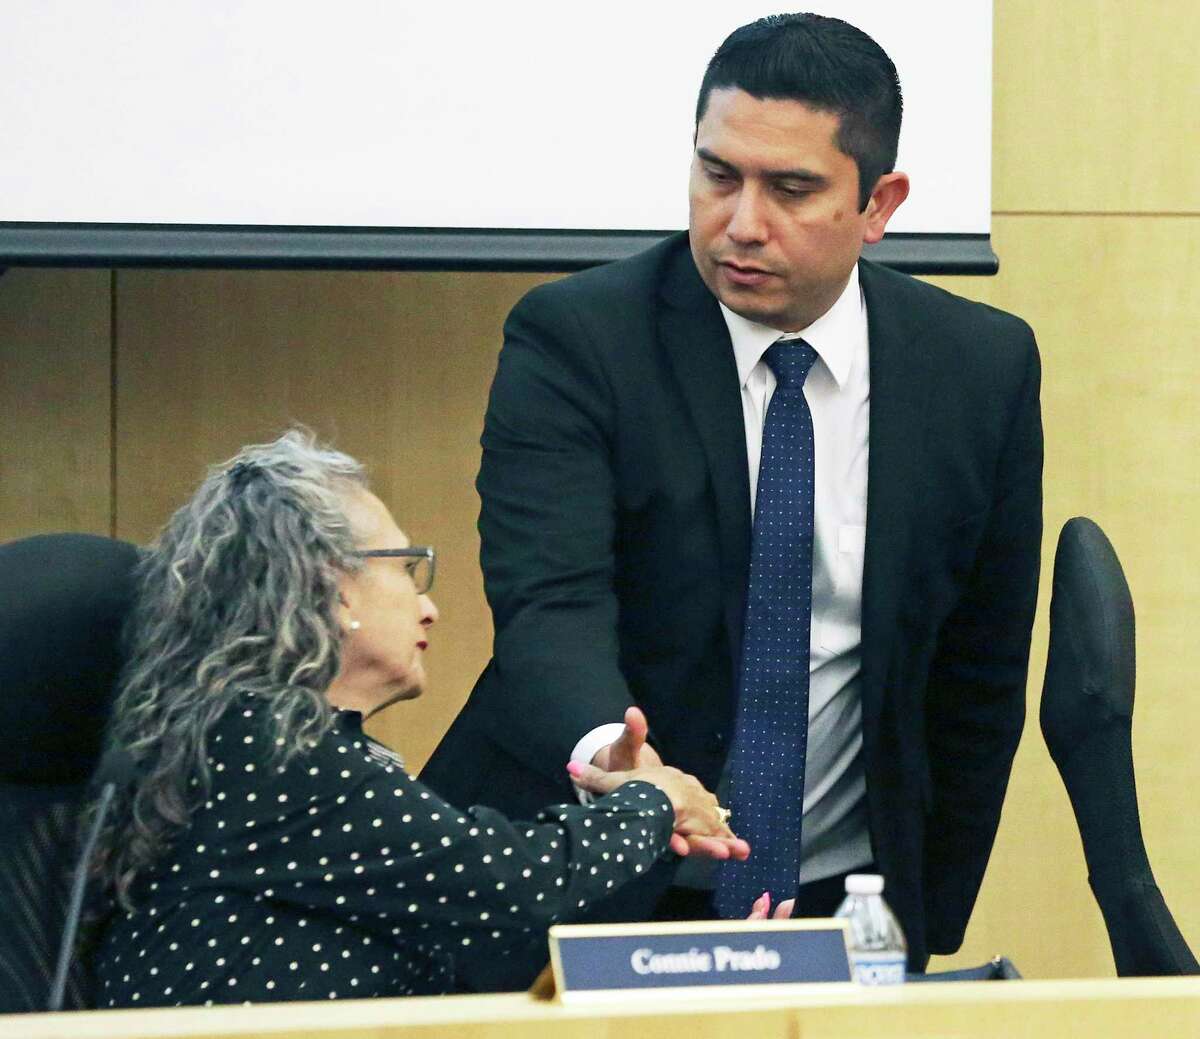 South San ISD Supertintendent Alexandro Flores greets board President Connie Prado before the start of Tuesday night’s meeting. At that meeting, trustees approved a separation agreement giving Flores $187,000, or the equivalent of 11 months’ pay, as part of a separation agreement.